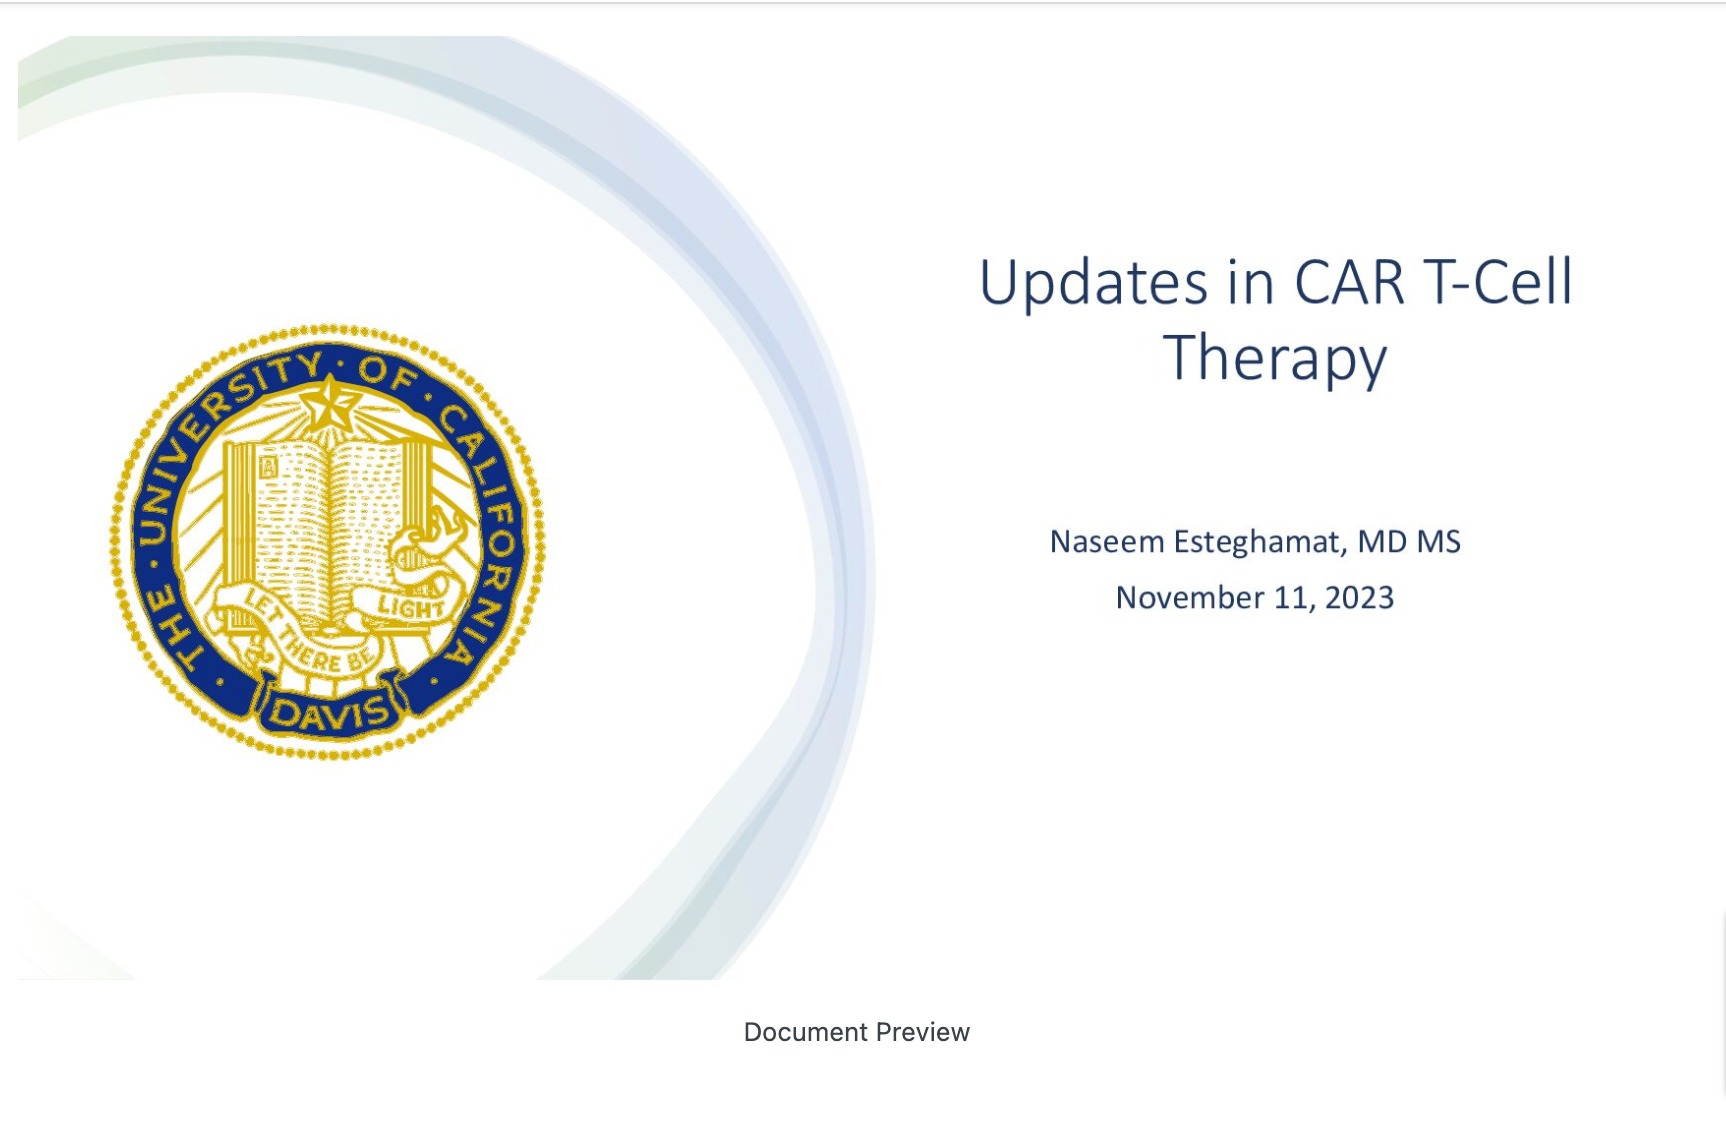 Updates in CAR-T Therapies